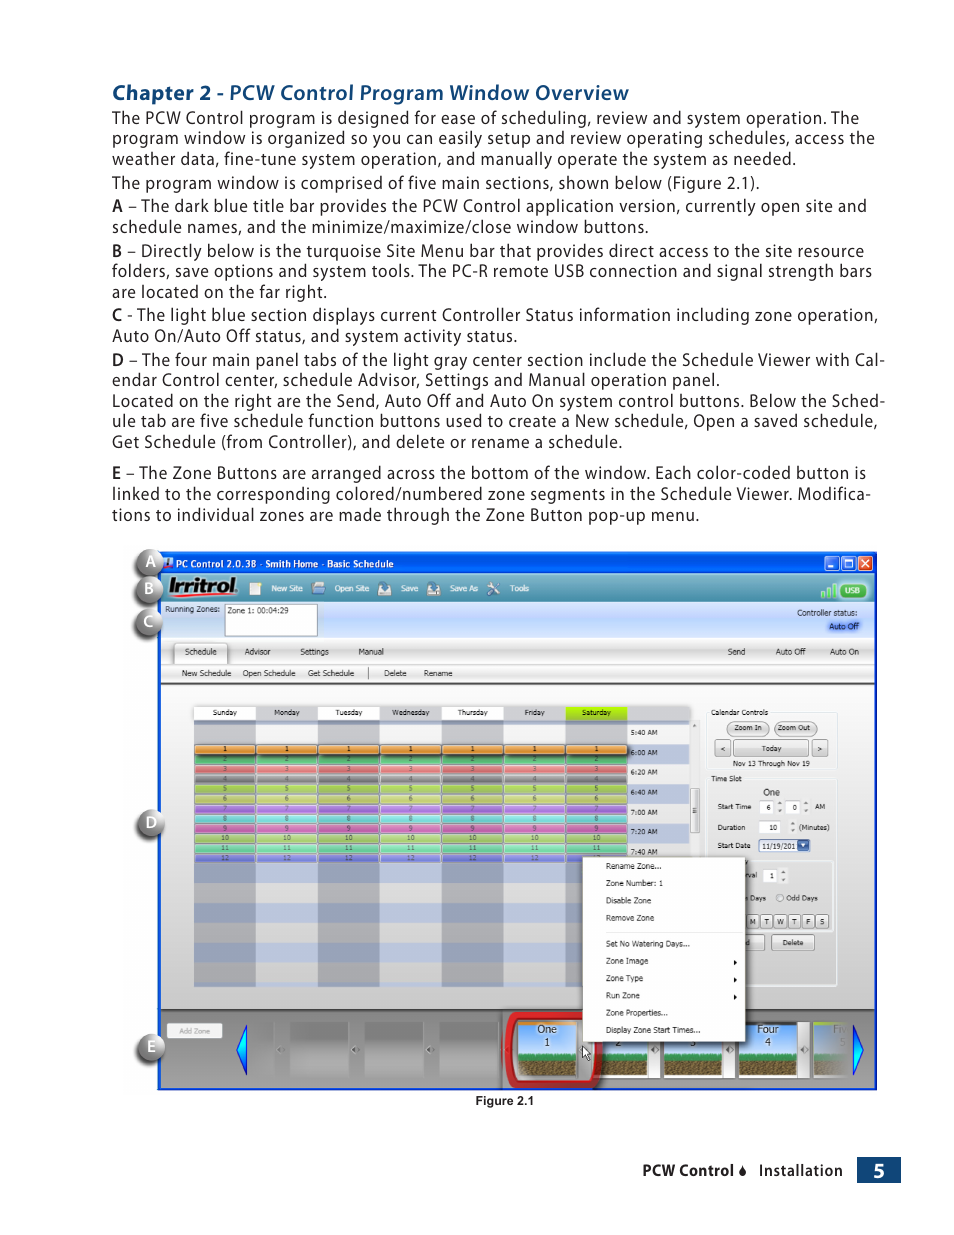 5chapter 2 - pcw control program window overview | Irritrol PCW Control User Manual | Page 7 / 33